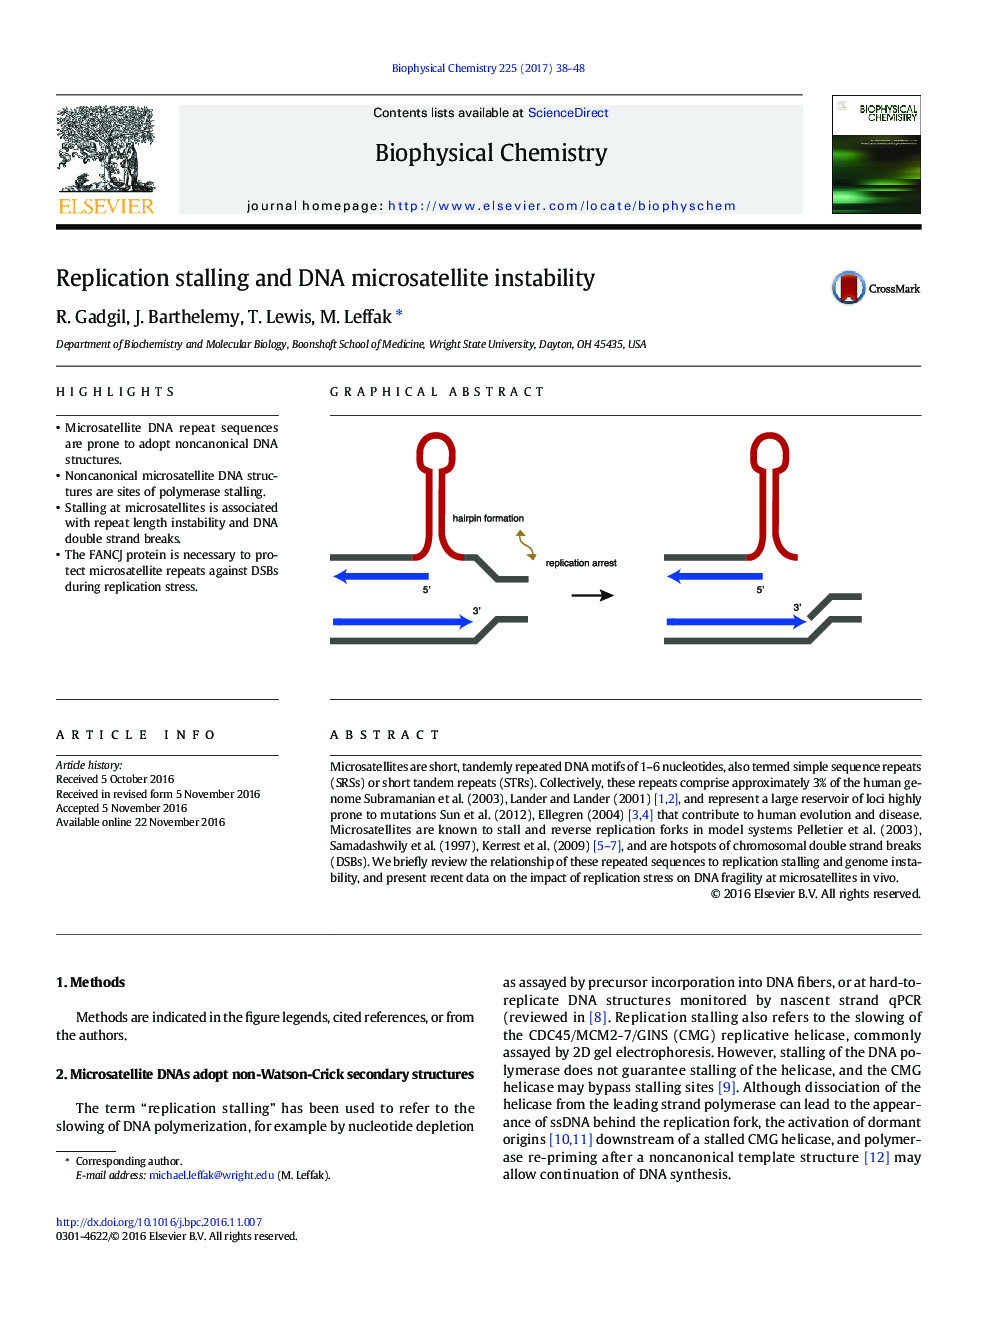 Replication stalling and DNA microsatellite instability